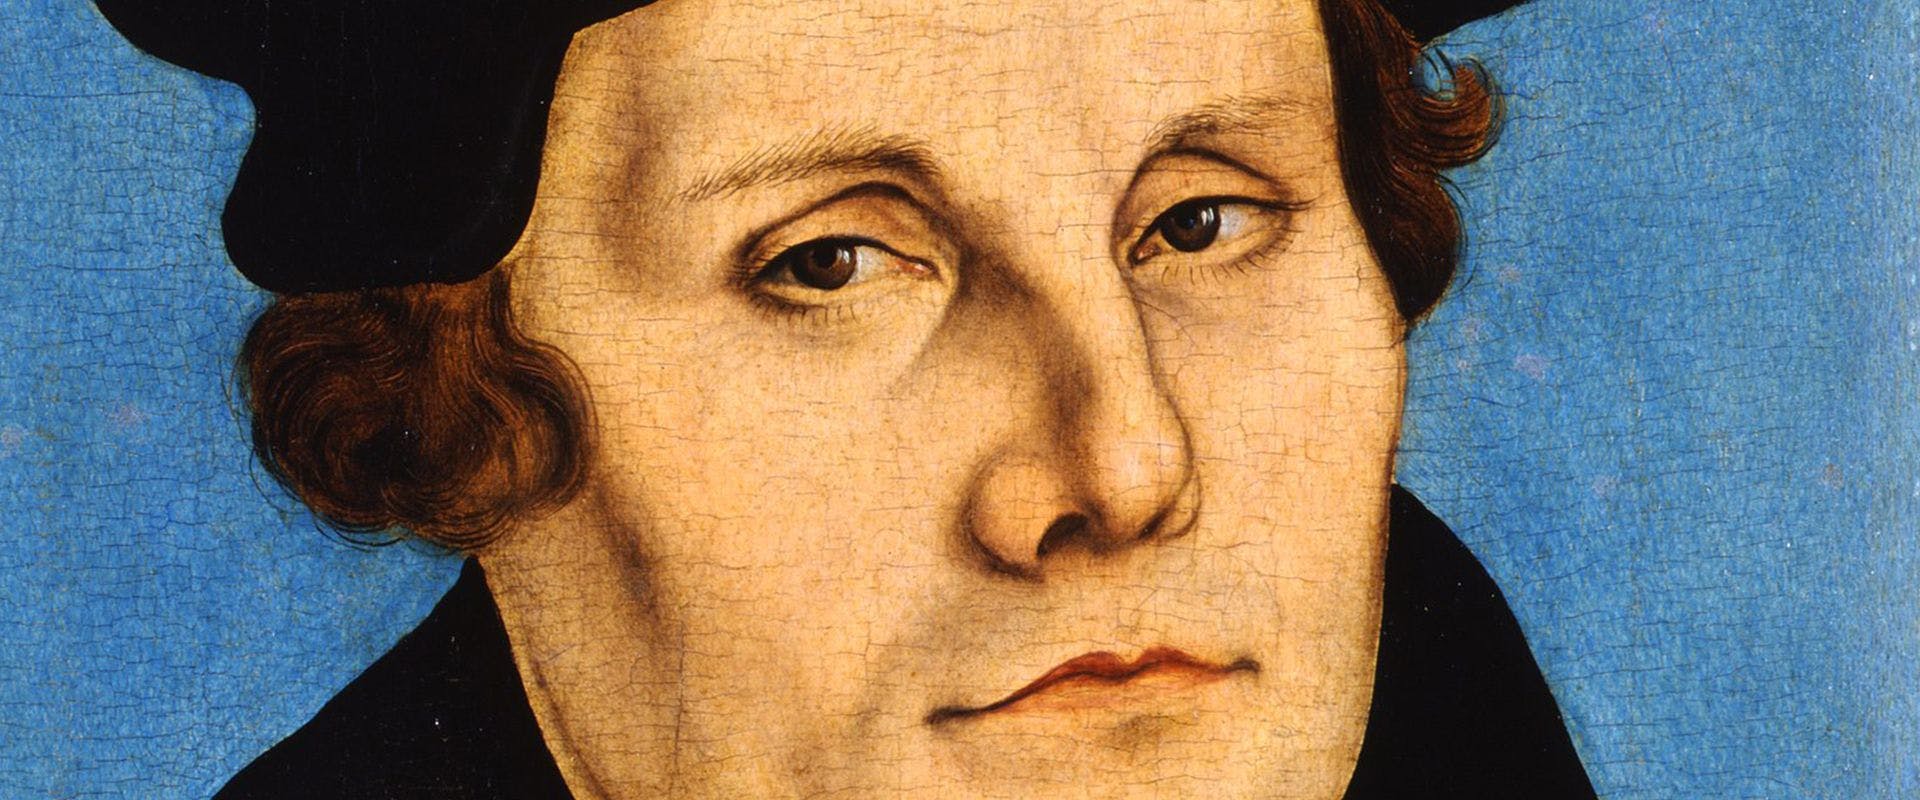 Portraits of the Reformation. Luther and Cranach in the Medici Collections